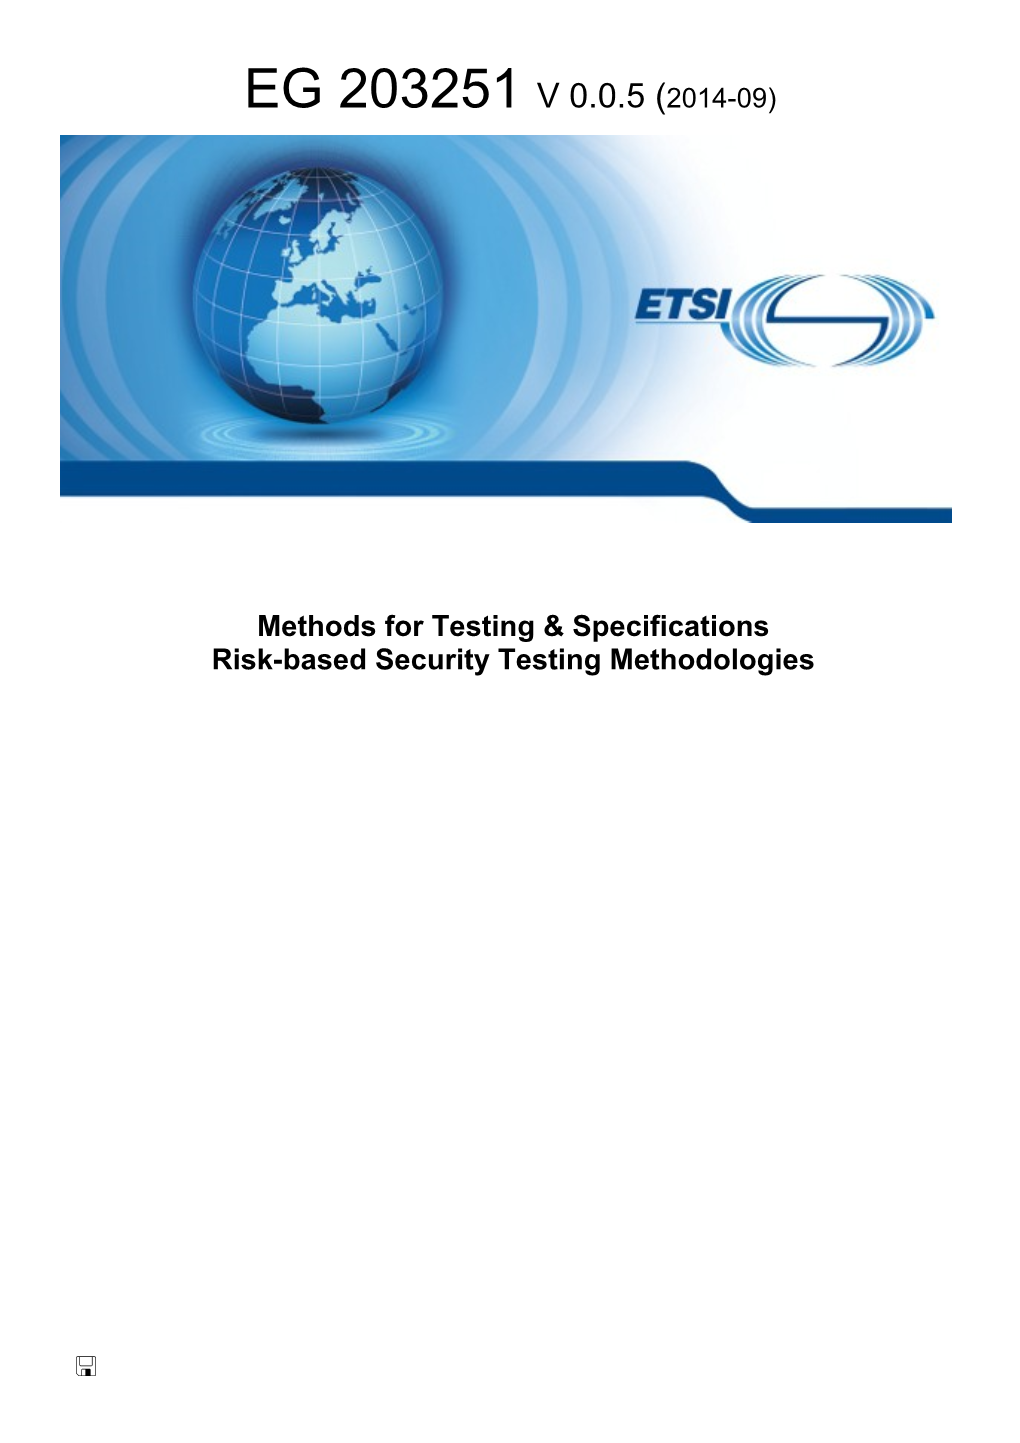 Methods for Testing & Specifications